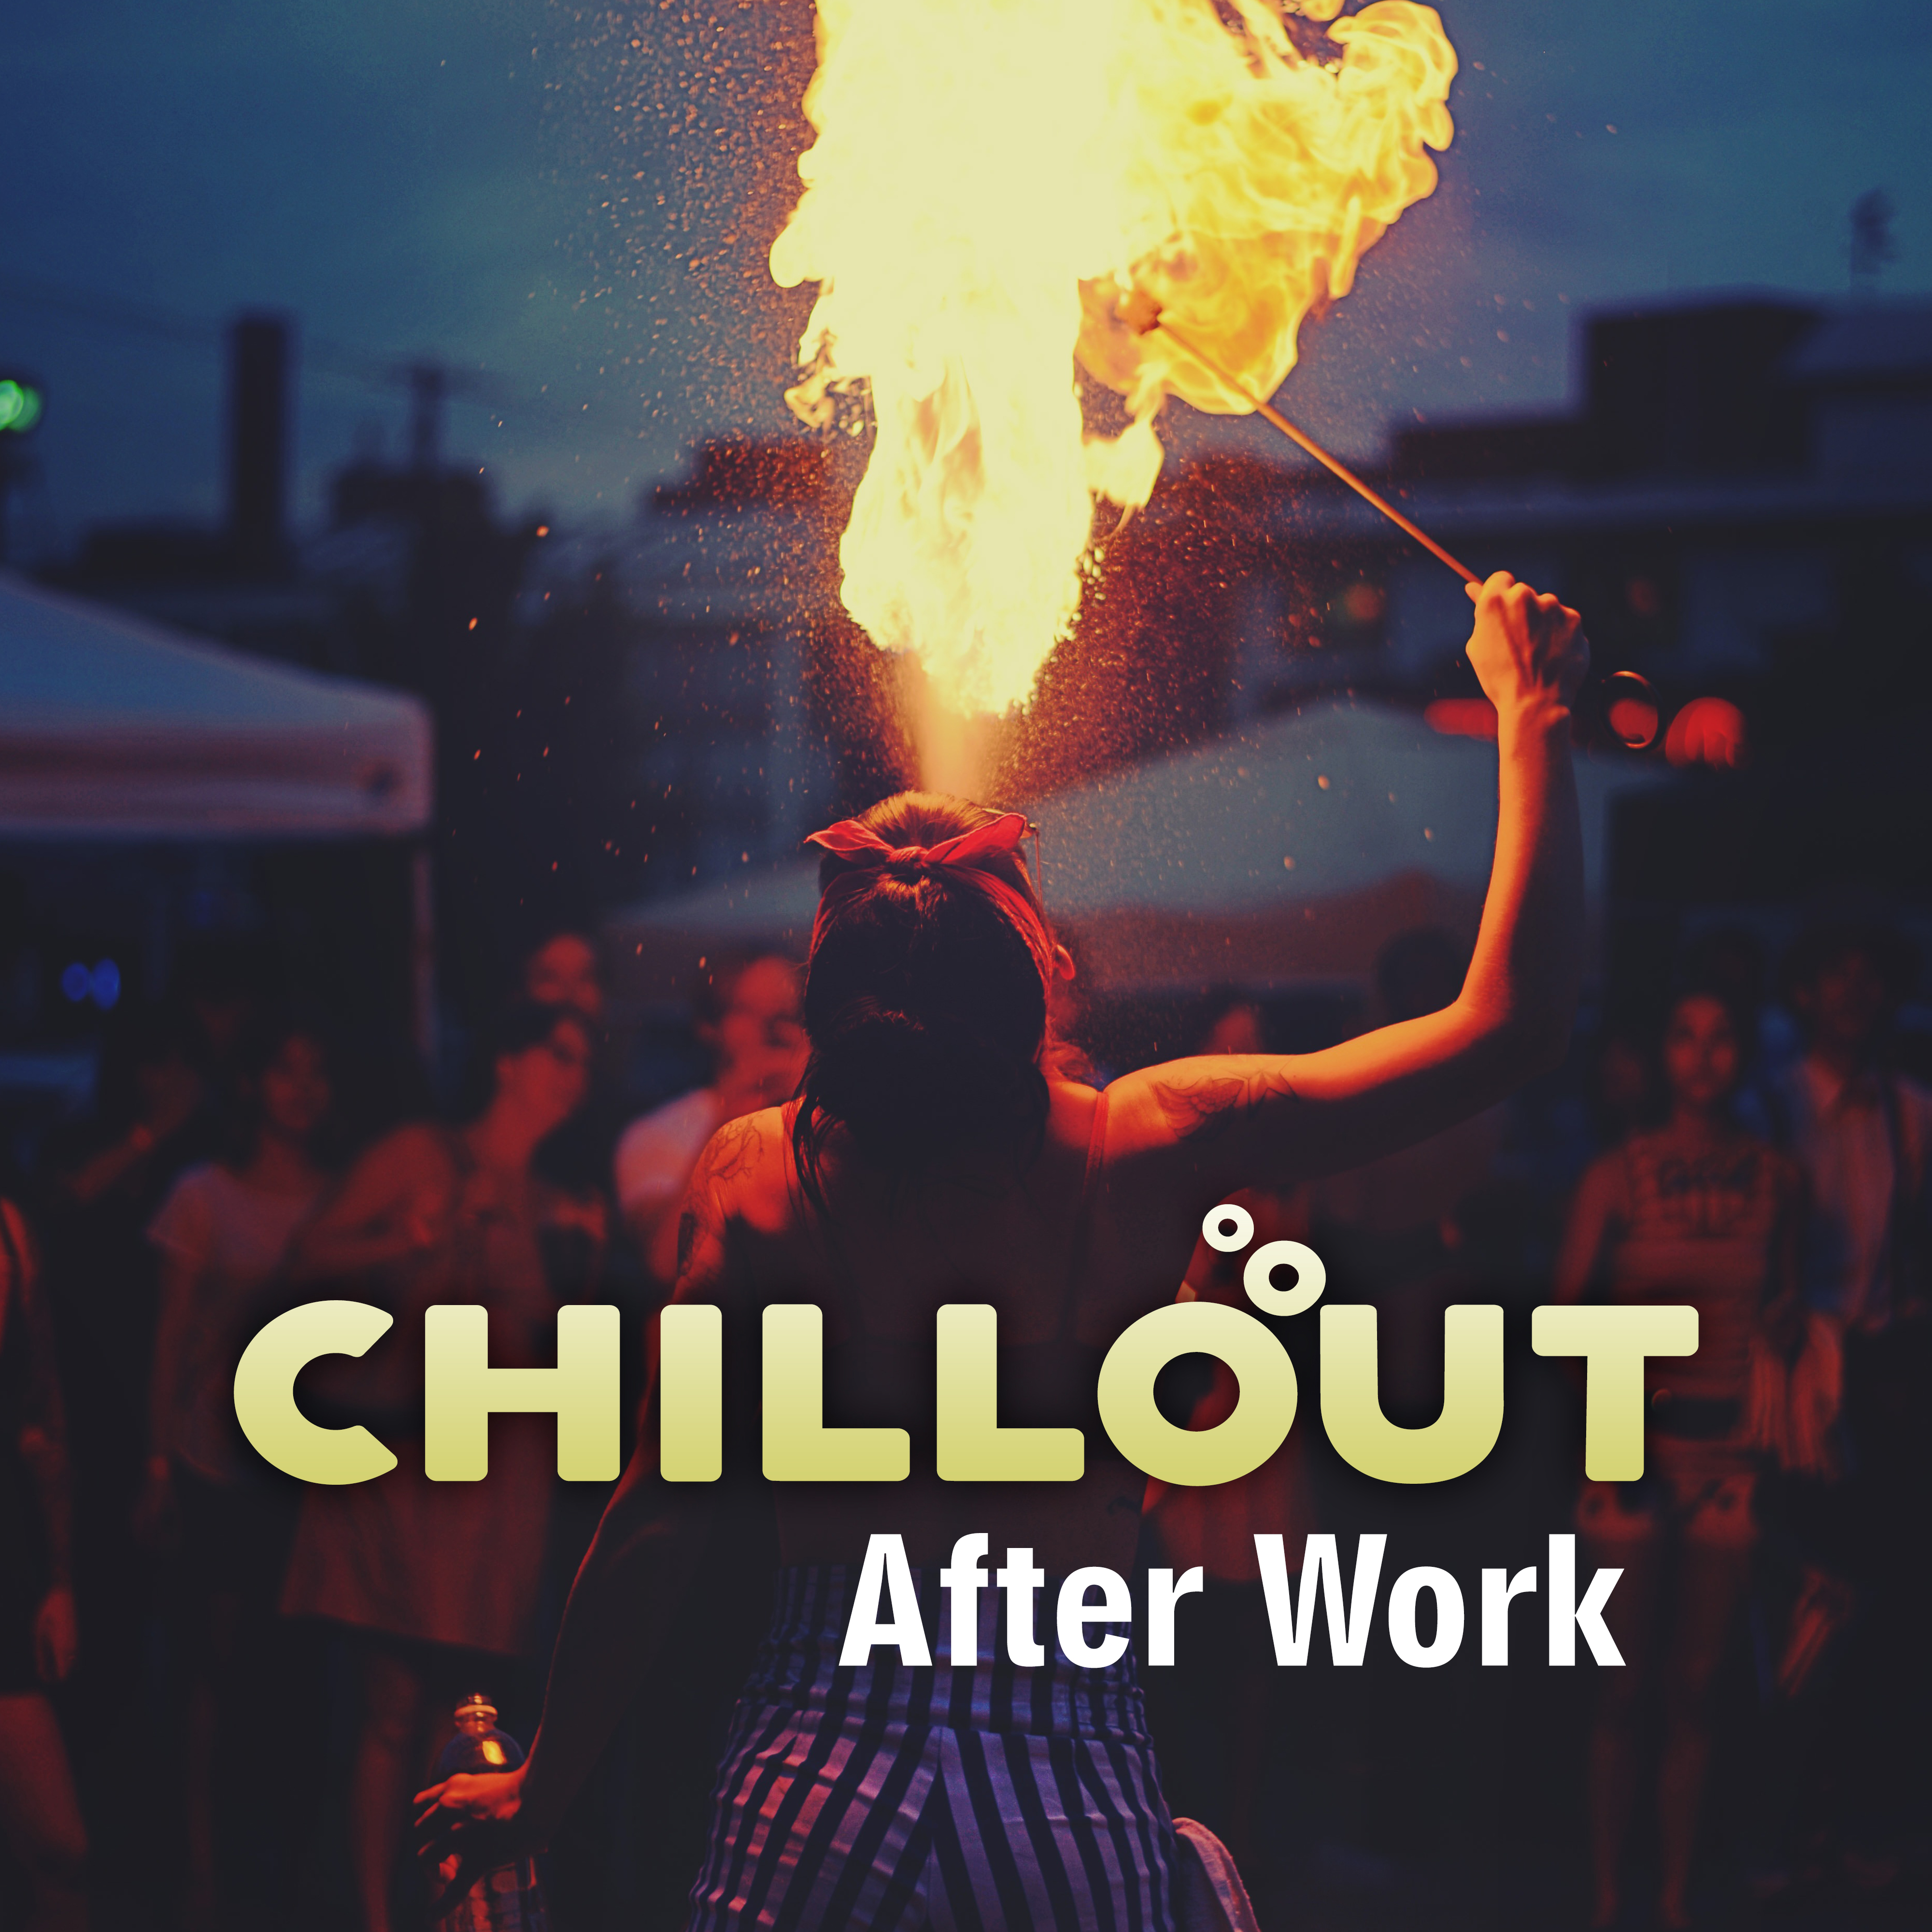 Chillout After Work – Chill Out 2017, Relaxing Music, Rest, Chill Out Essential, Office Music, Lounge